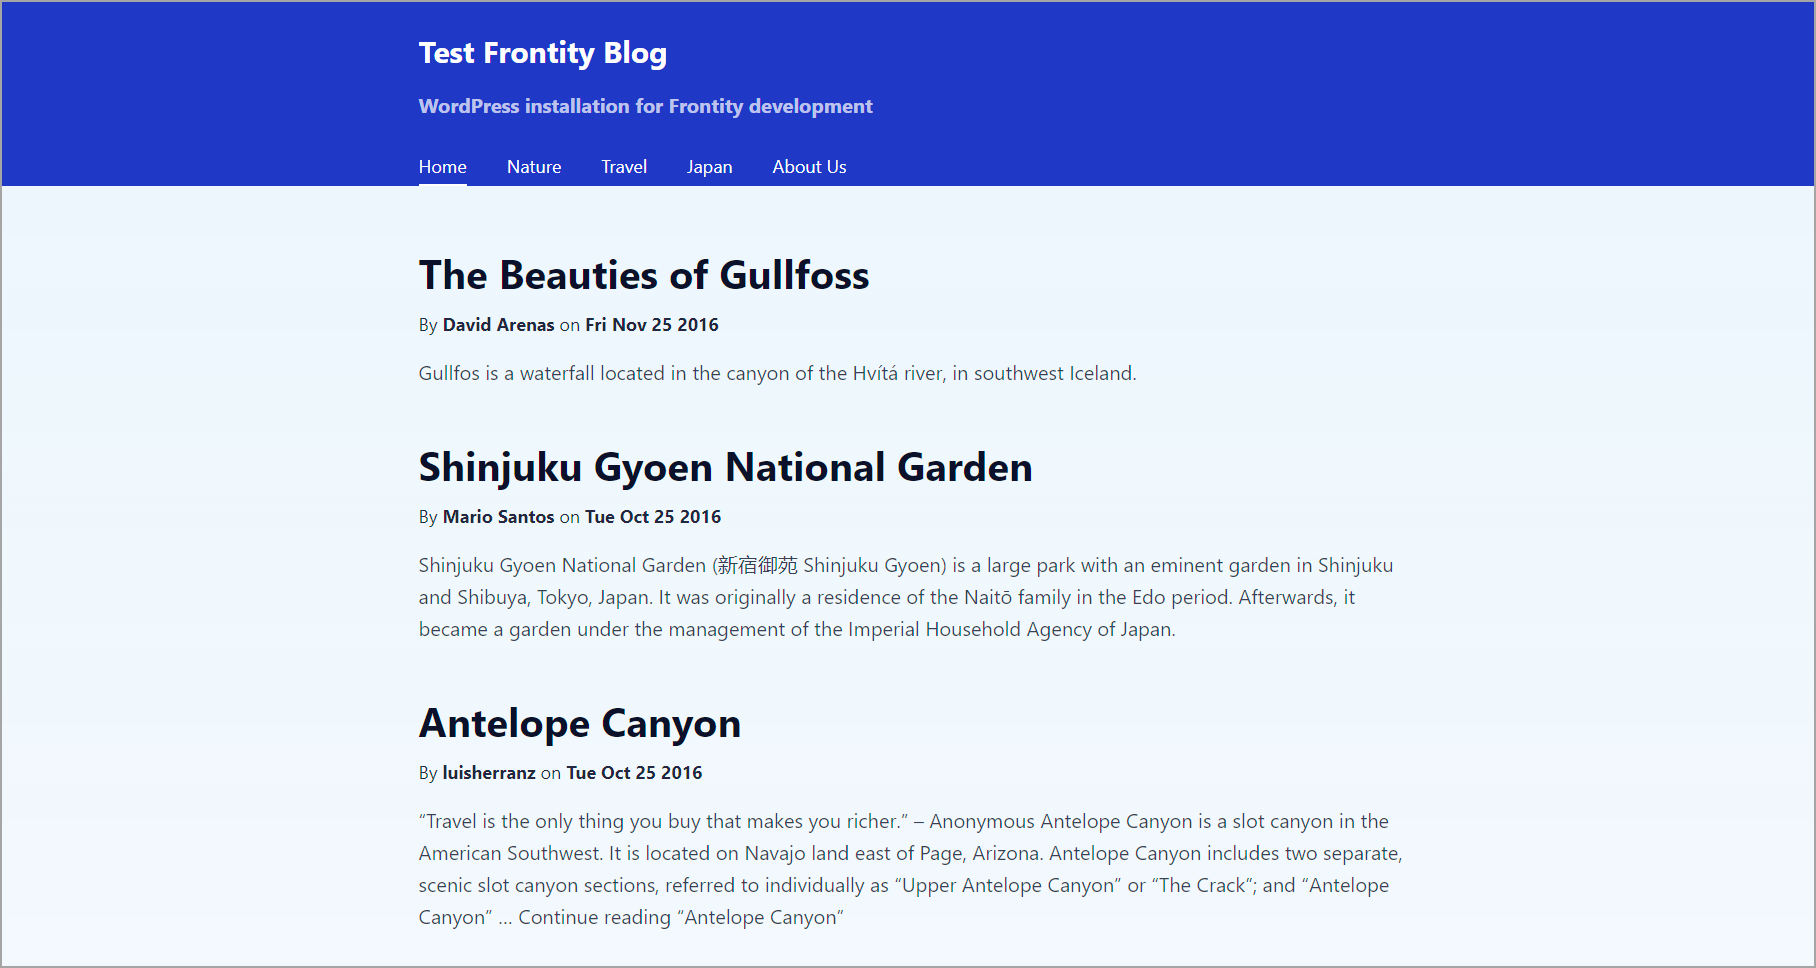 Screenshot of a webpage titled 'Test Frontity Blog' featuring content from Frontity's demo site. It has navigation links for 'Home', 'Nature', 'Travel', 'Japan', and 'About Us'. The 'Home' page is currently selected, displaying three blog posts. The header background is blue and the rest of the page has a light blue background